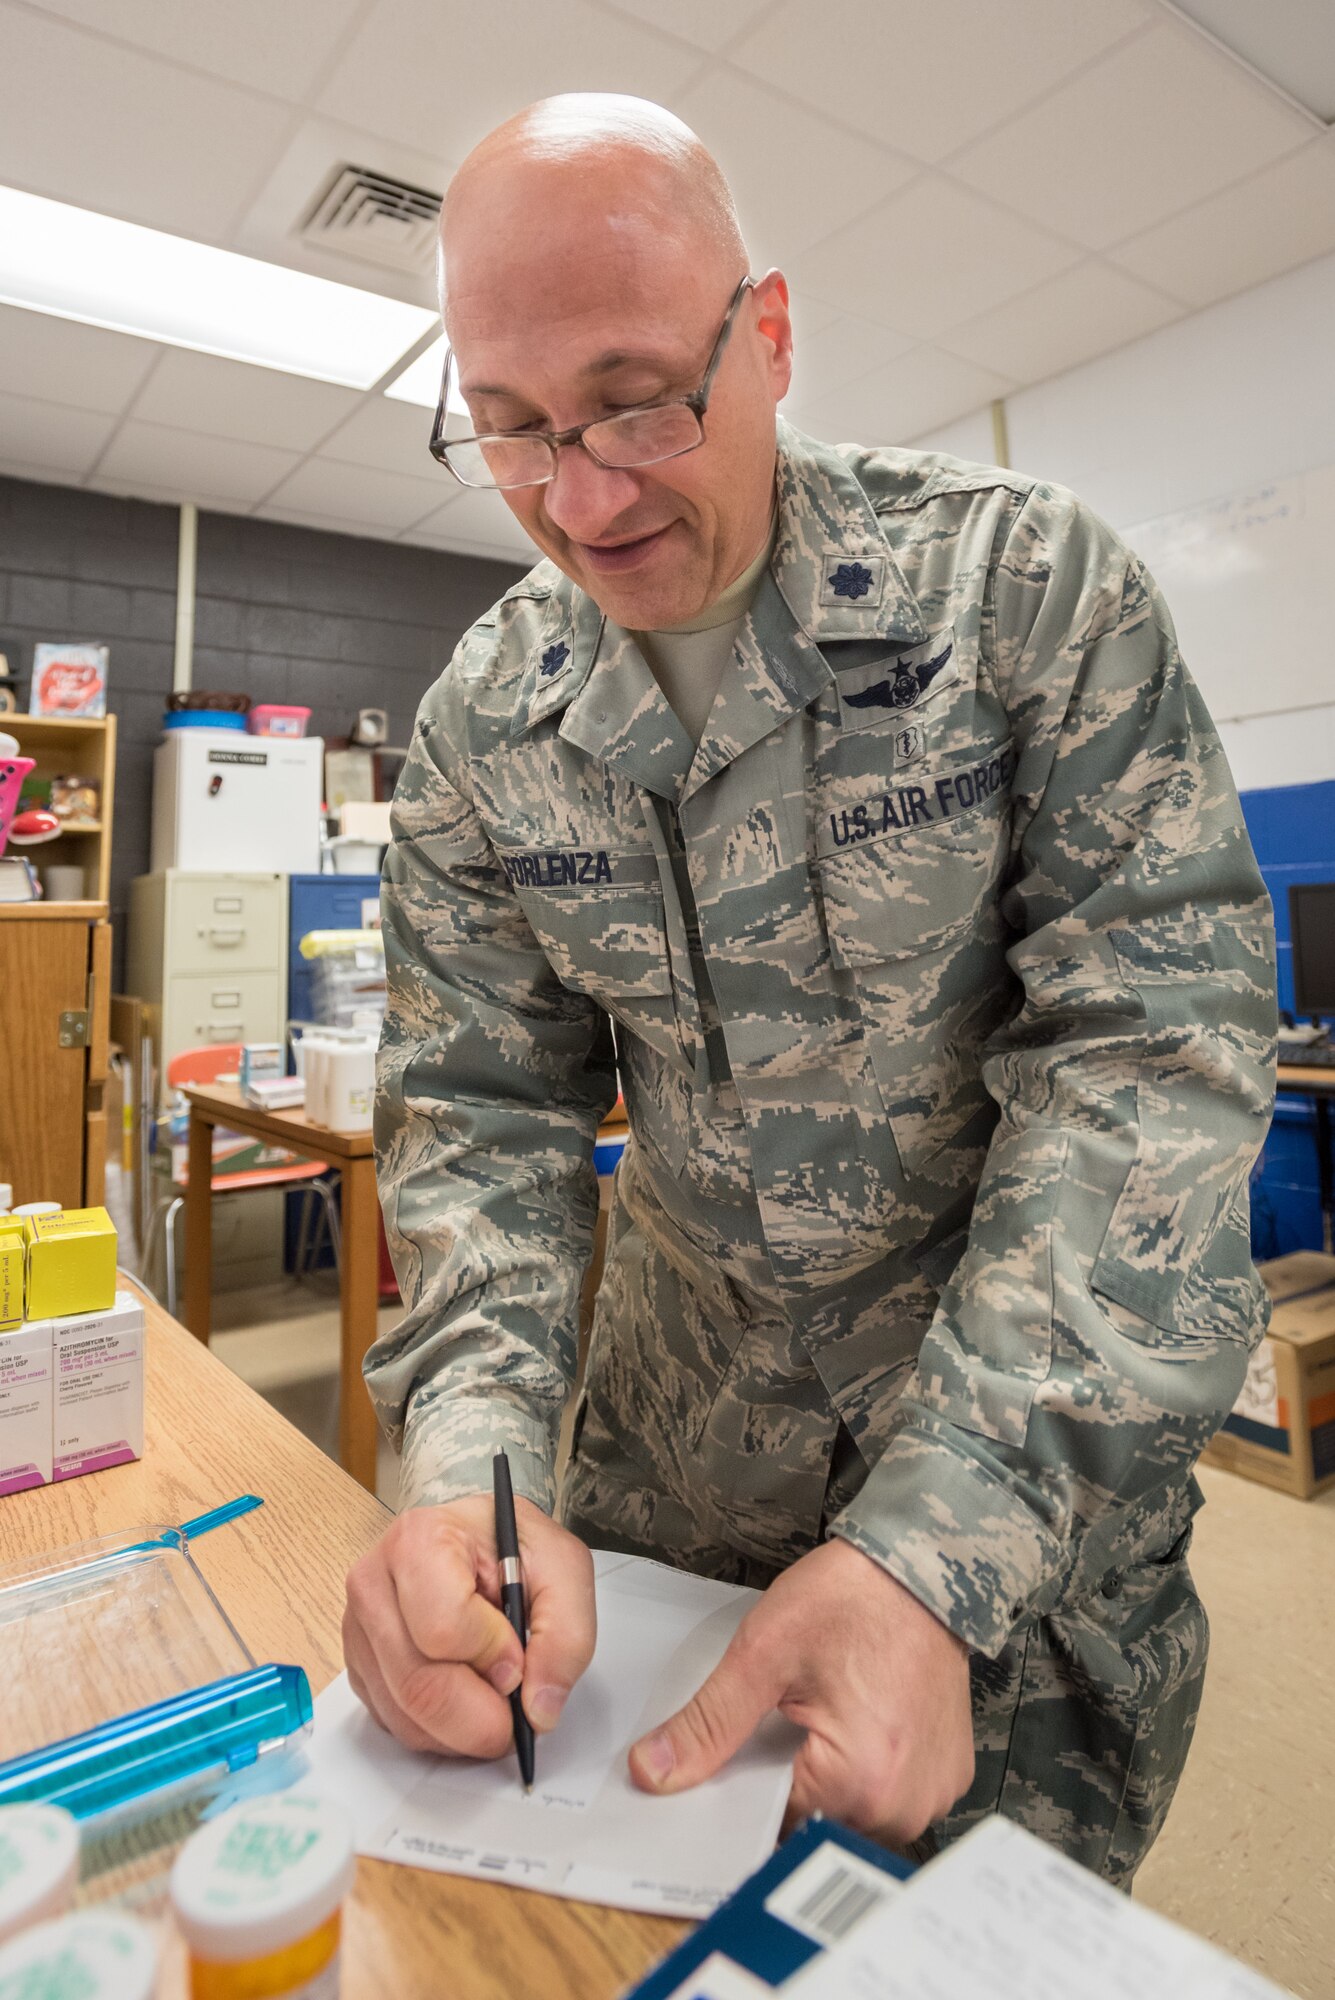 U.S. Air Force Lt. Col. Philip Forlenza, a pharmacist from the New York Air National Guard’s 105th Airlift Wing, fills a patient prescription at a health-care clinic being operated by the Air Guard and U.S. Navy Reserve at Breathitt County High School in Jackson, Ky., June 20, 2018. The Jackson clinic is one of four that comprised Operation Bobcat, a 10-day mission to provide military medical troops with crucial training in field operations and logistics while offering no-cost health care to the residents of Eastern Kentucky. The clinics, which operated from June 15-24, offered non-emergent medical care; sports physicals; dental cleanings, fillings and extractions; eye exams and no-cost prescription eye glasses. (U.S. Air National Guard photo by Lt. Col. Dale Greer)